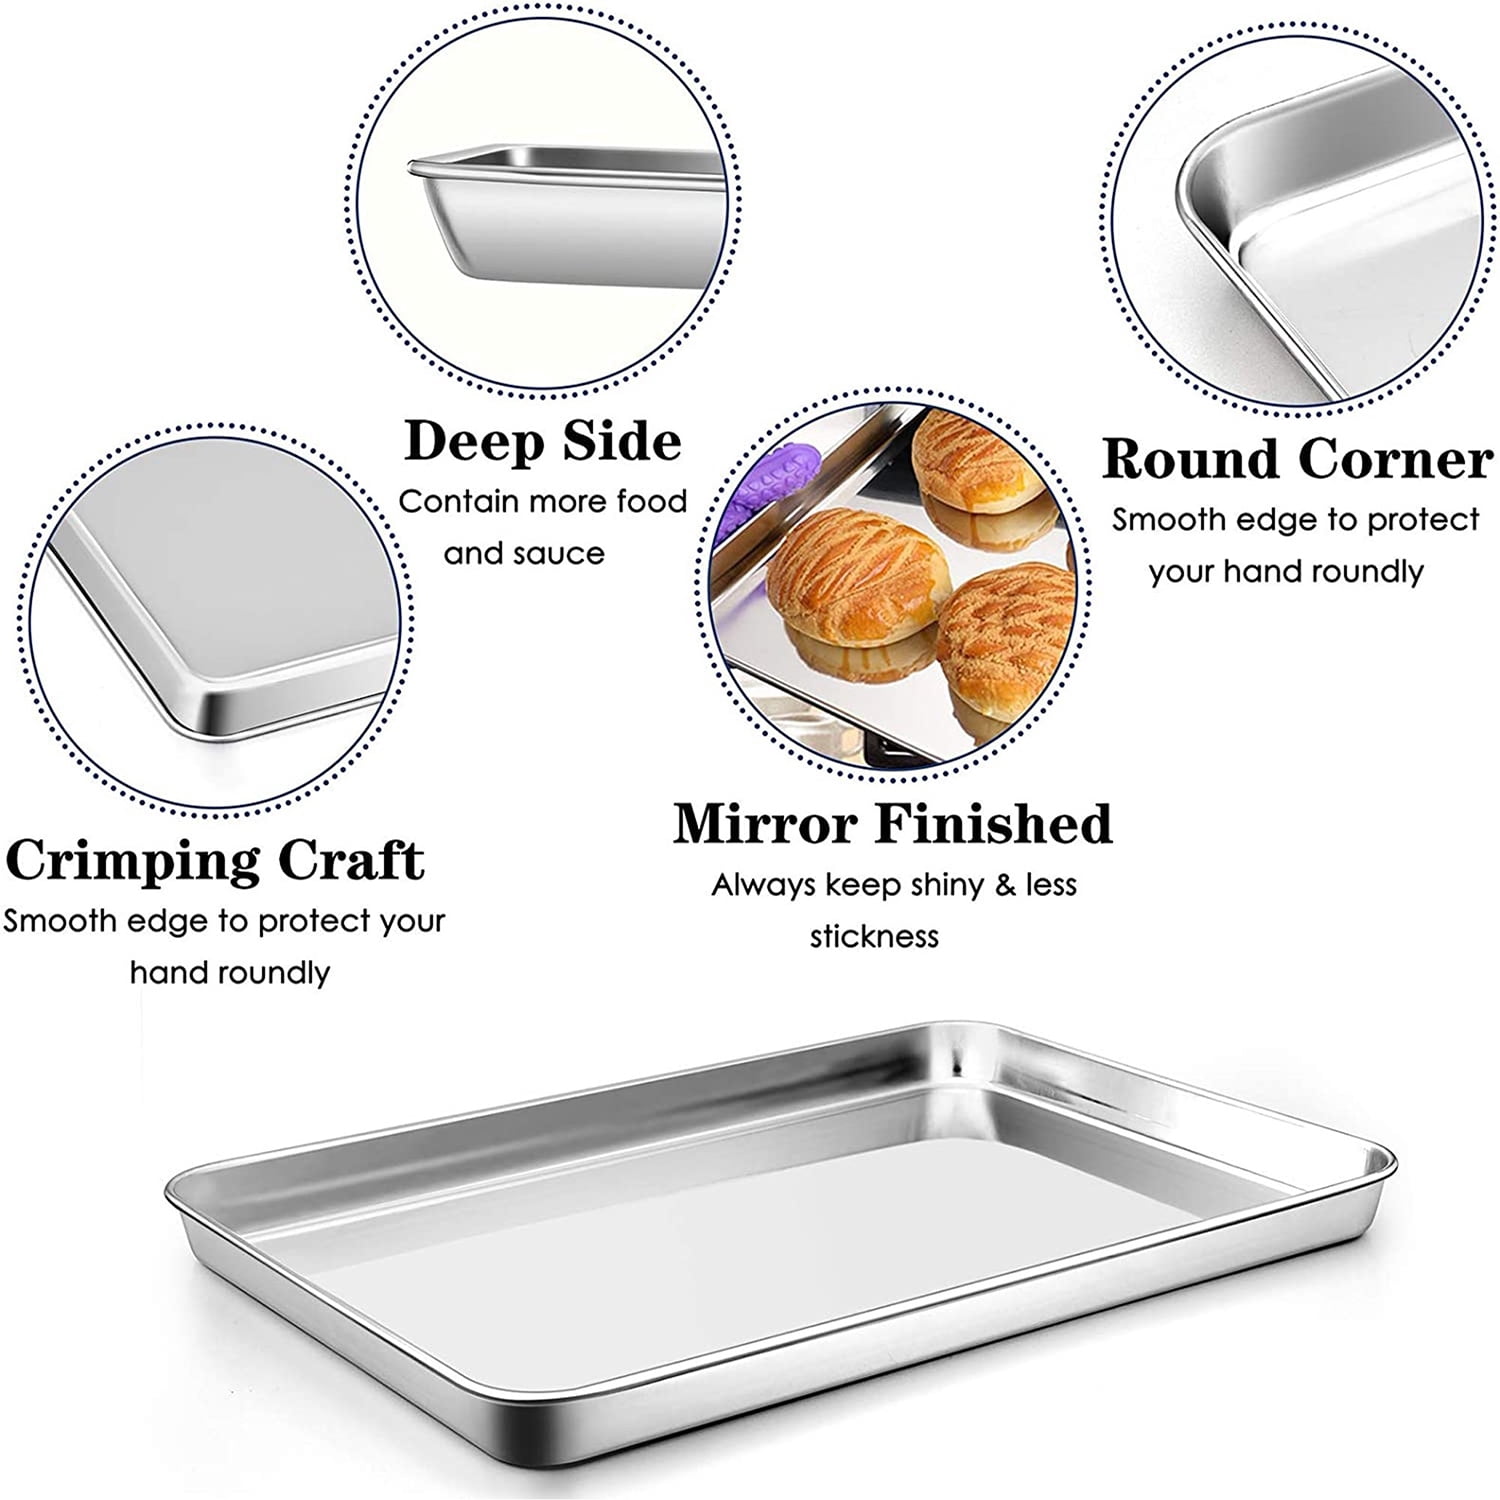 Vesteel 20 inch x 14 inch x 1 inch Extra Large Baking Sheet Set of 2, Heavy Duty Stainless Steel Cookie Sheet Baking Pan for Oven, Non-Stick 